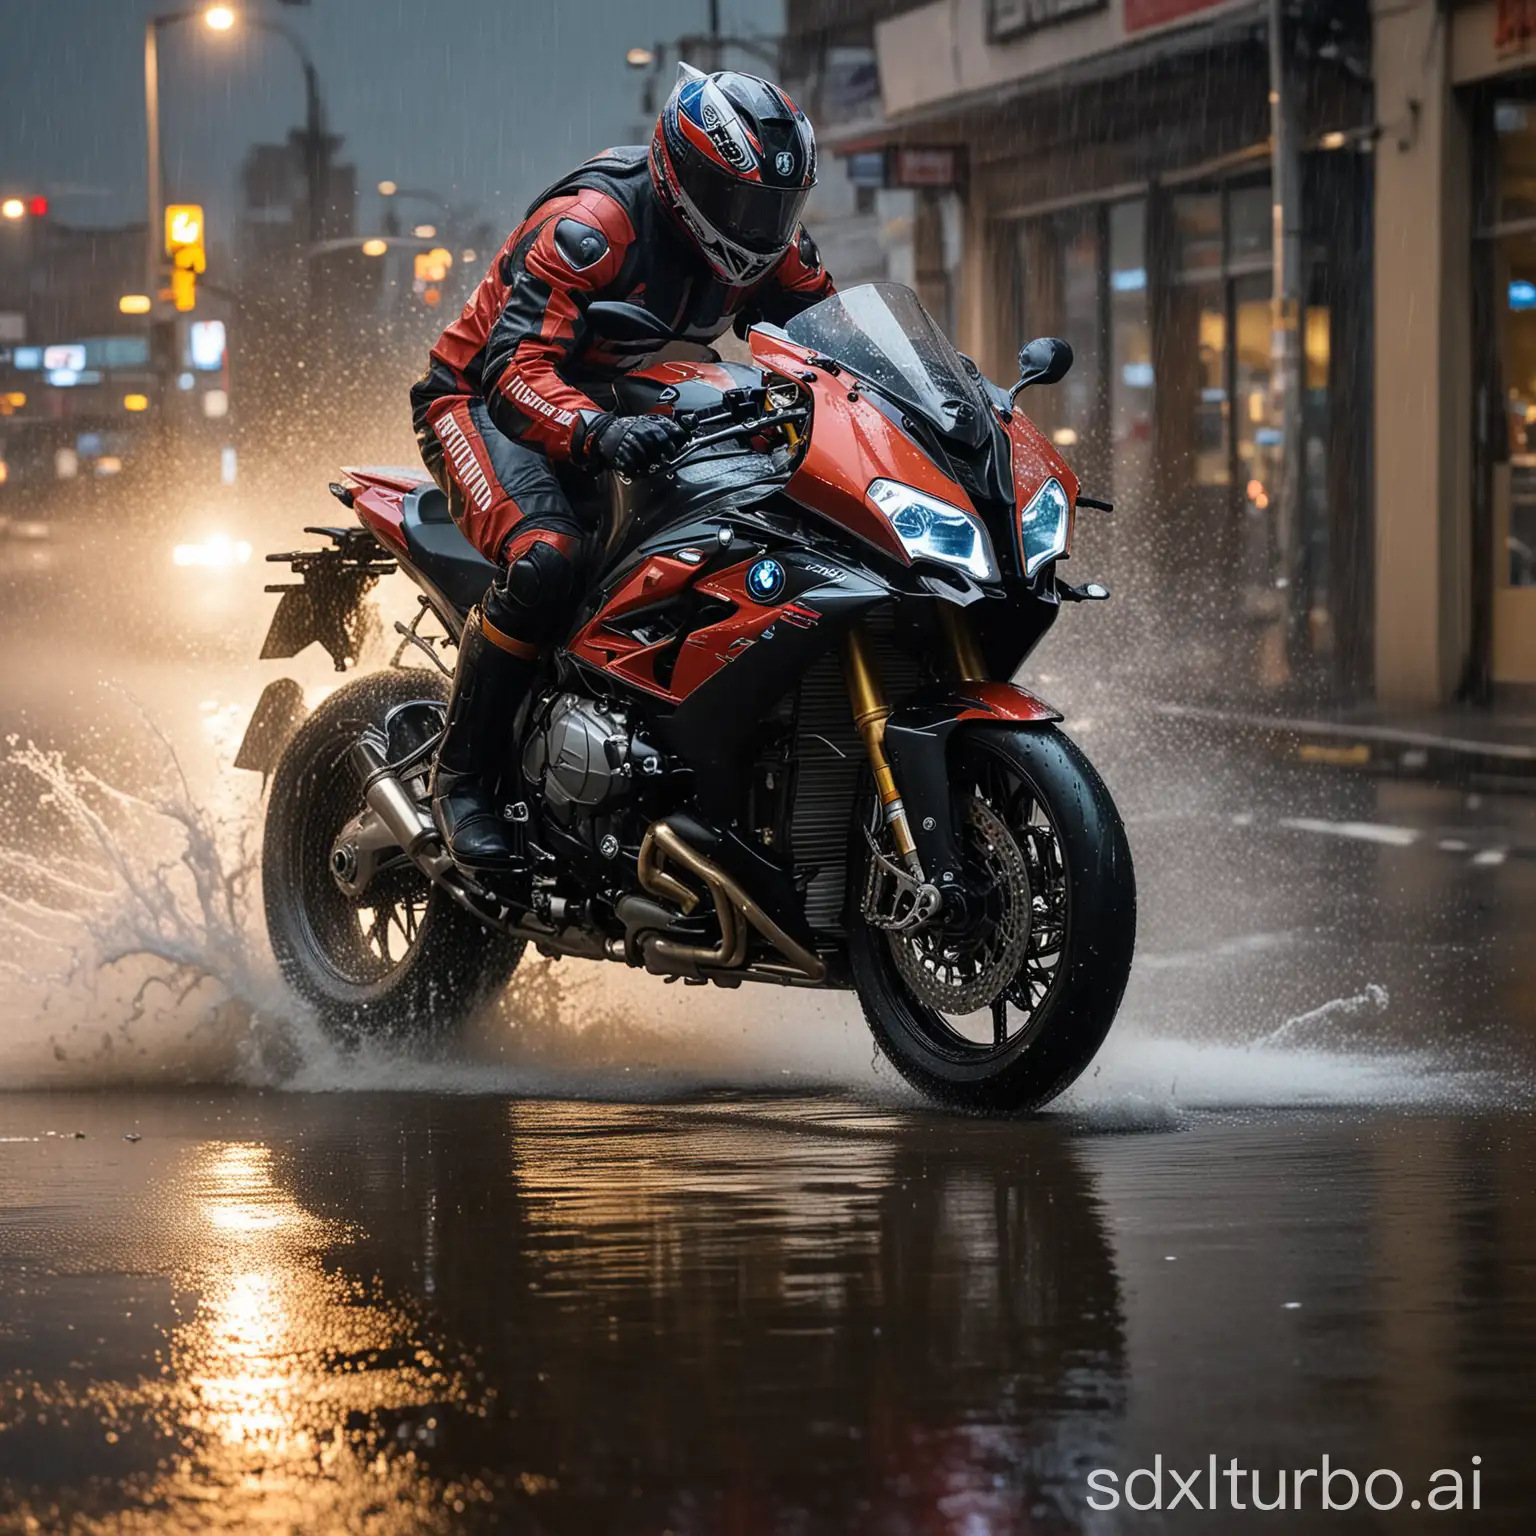 A motorcyclist, dressed in a waterproof racing suit and a streamlined helmet, rides his iconic BMW S1000RR through a torrential downpour on a slick urban road at night. The motorcycle's LED headlights pierce through the rain, illuminating the path ahead. The neon lights and store displays along the street create a kaleidoscope of colors refracted by the raindrops. As the tires skim across the puddles, they kick up towering splashes of water. The rider leans forward, embodying a unified posture with his bike, his face displaying a look of intense focus and exhilaration. The entire scene is imbued with a sense of speed and adventure.